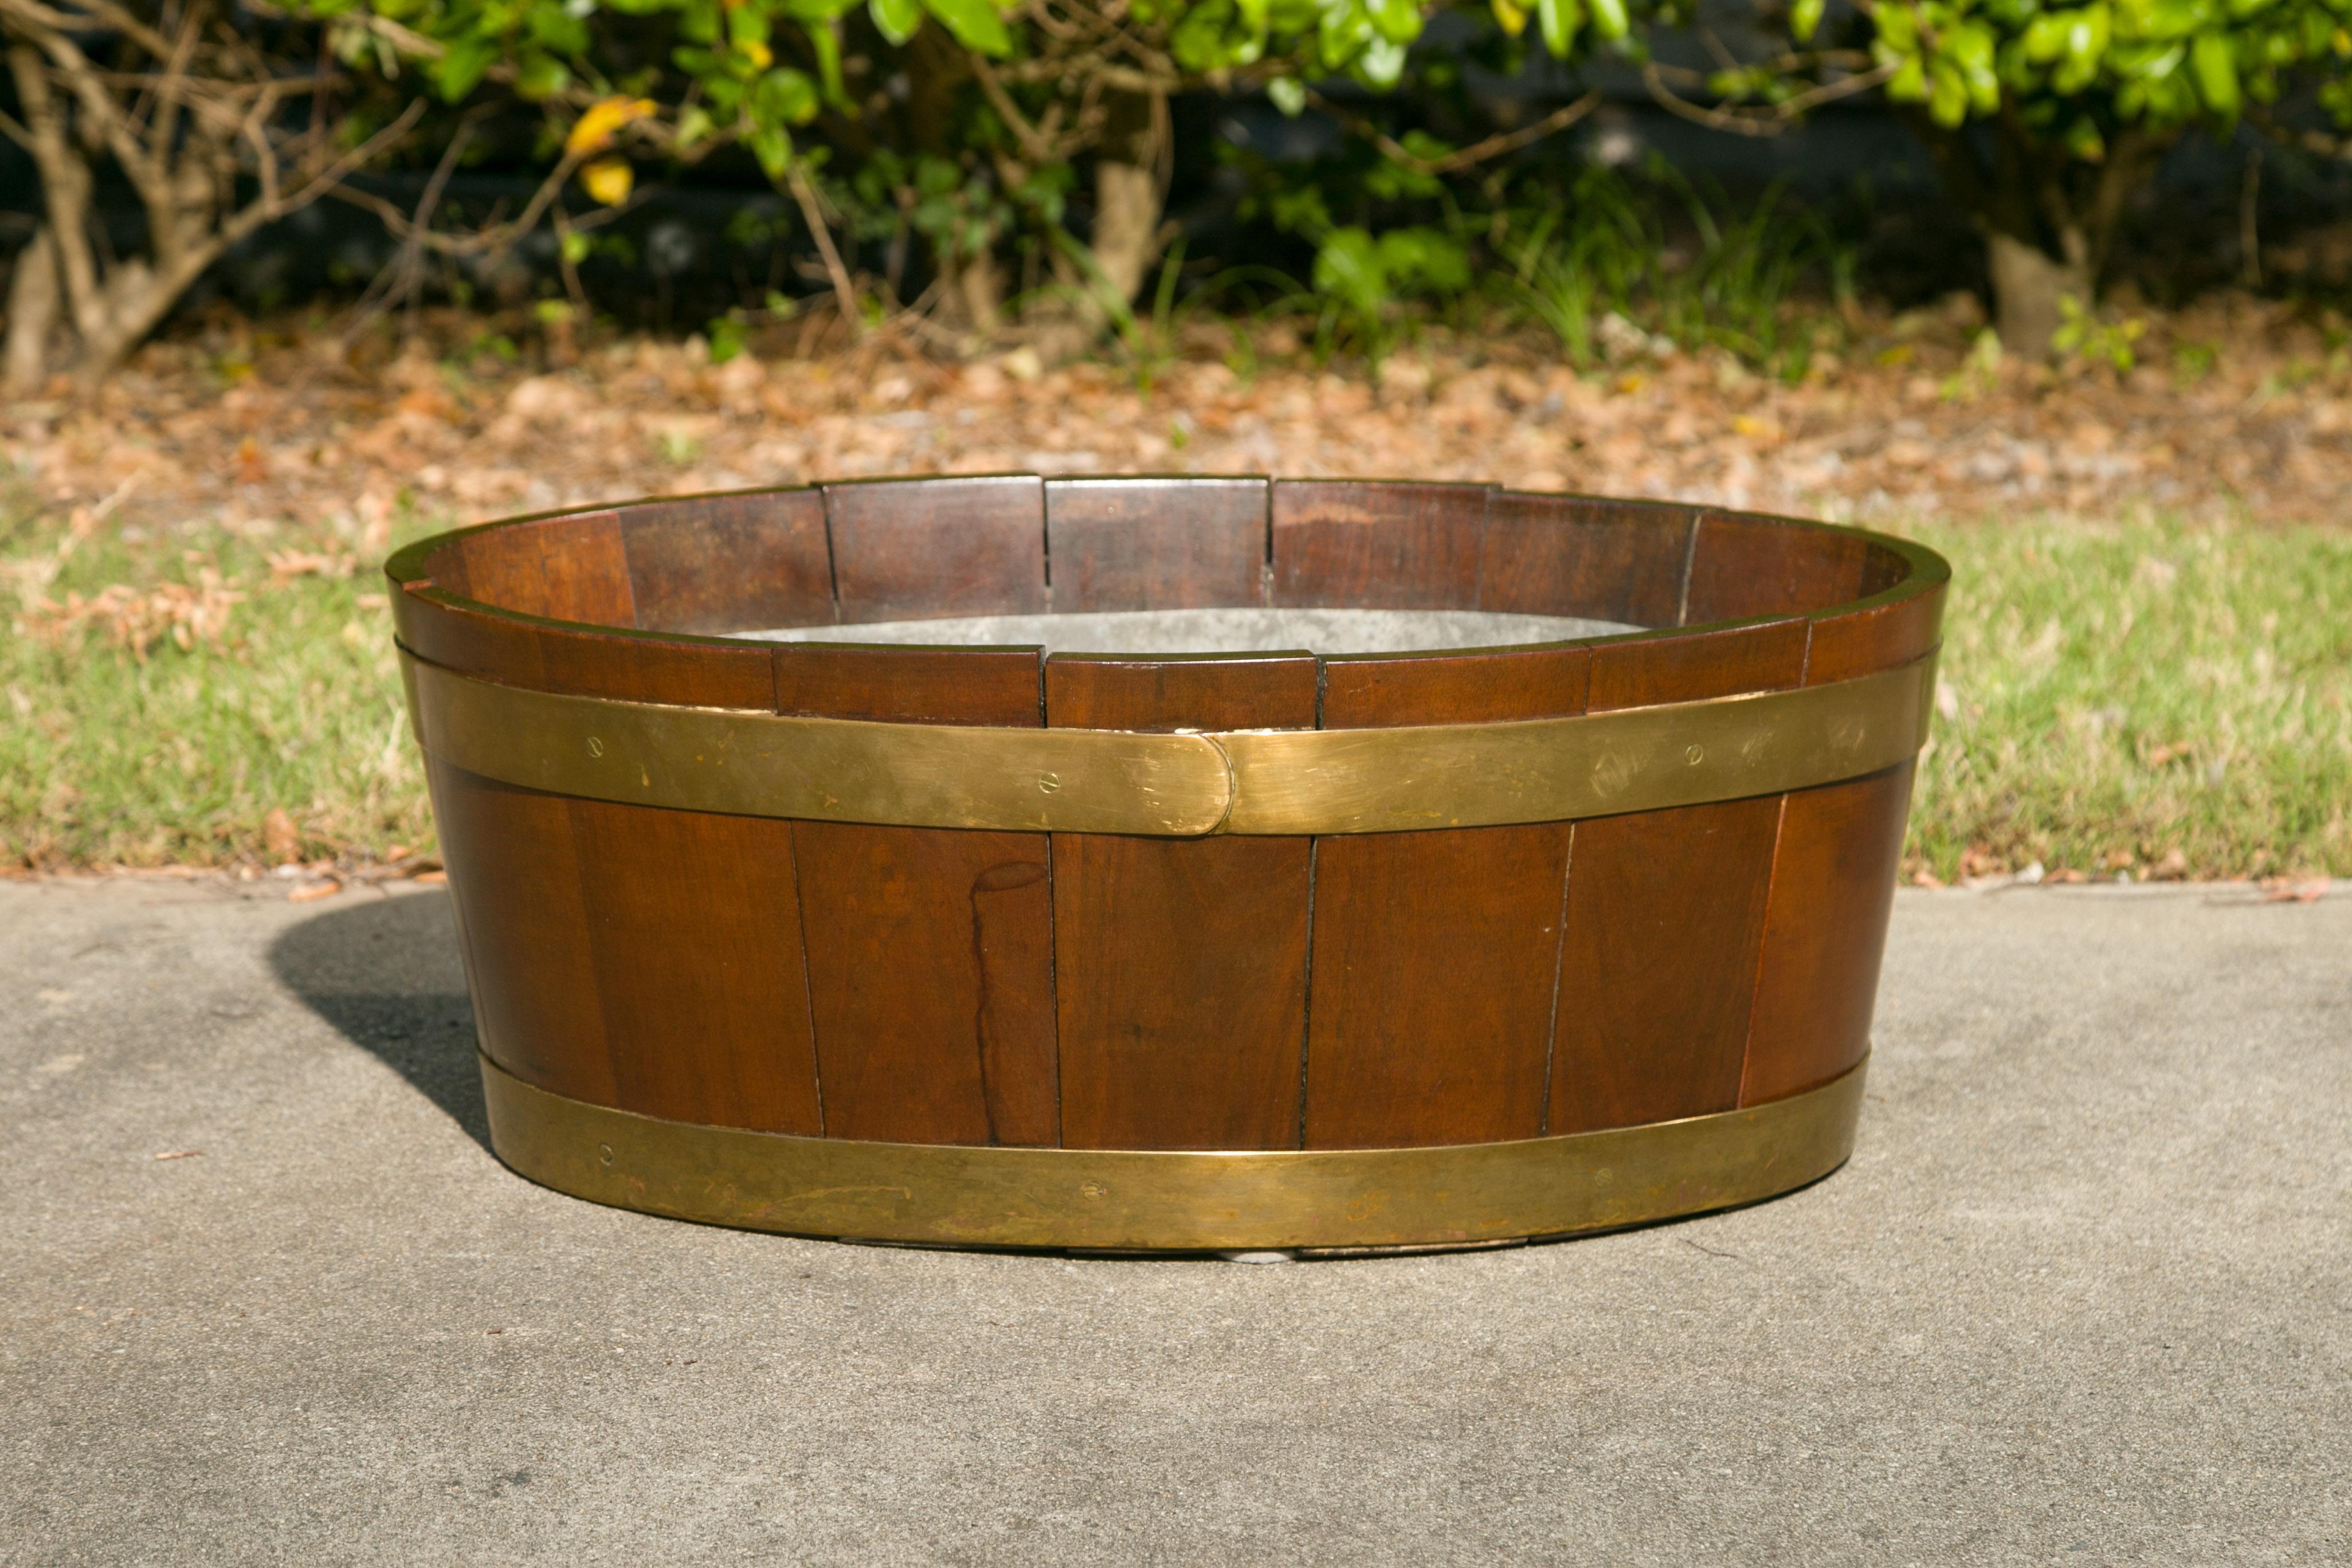 An English oval oak planter from the late 19th century with brass braces and liner. Used as a wine cooler or a planter, this oval piece, strengthened with horizontal brass braces whose golden hue compliments the brown color of the oak perfectly is